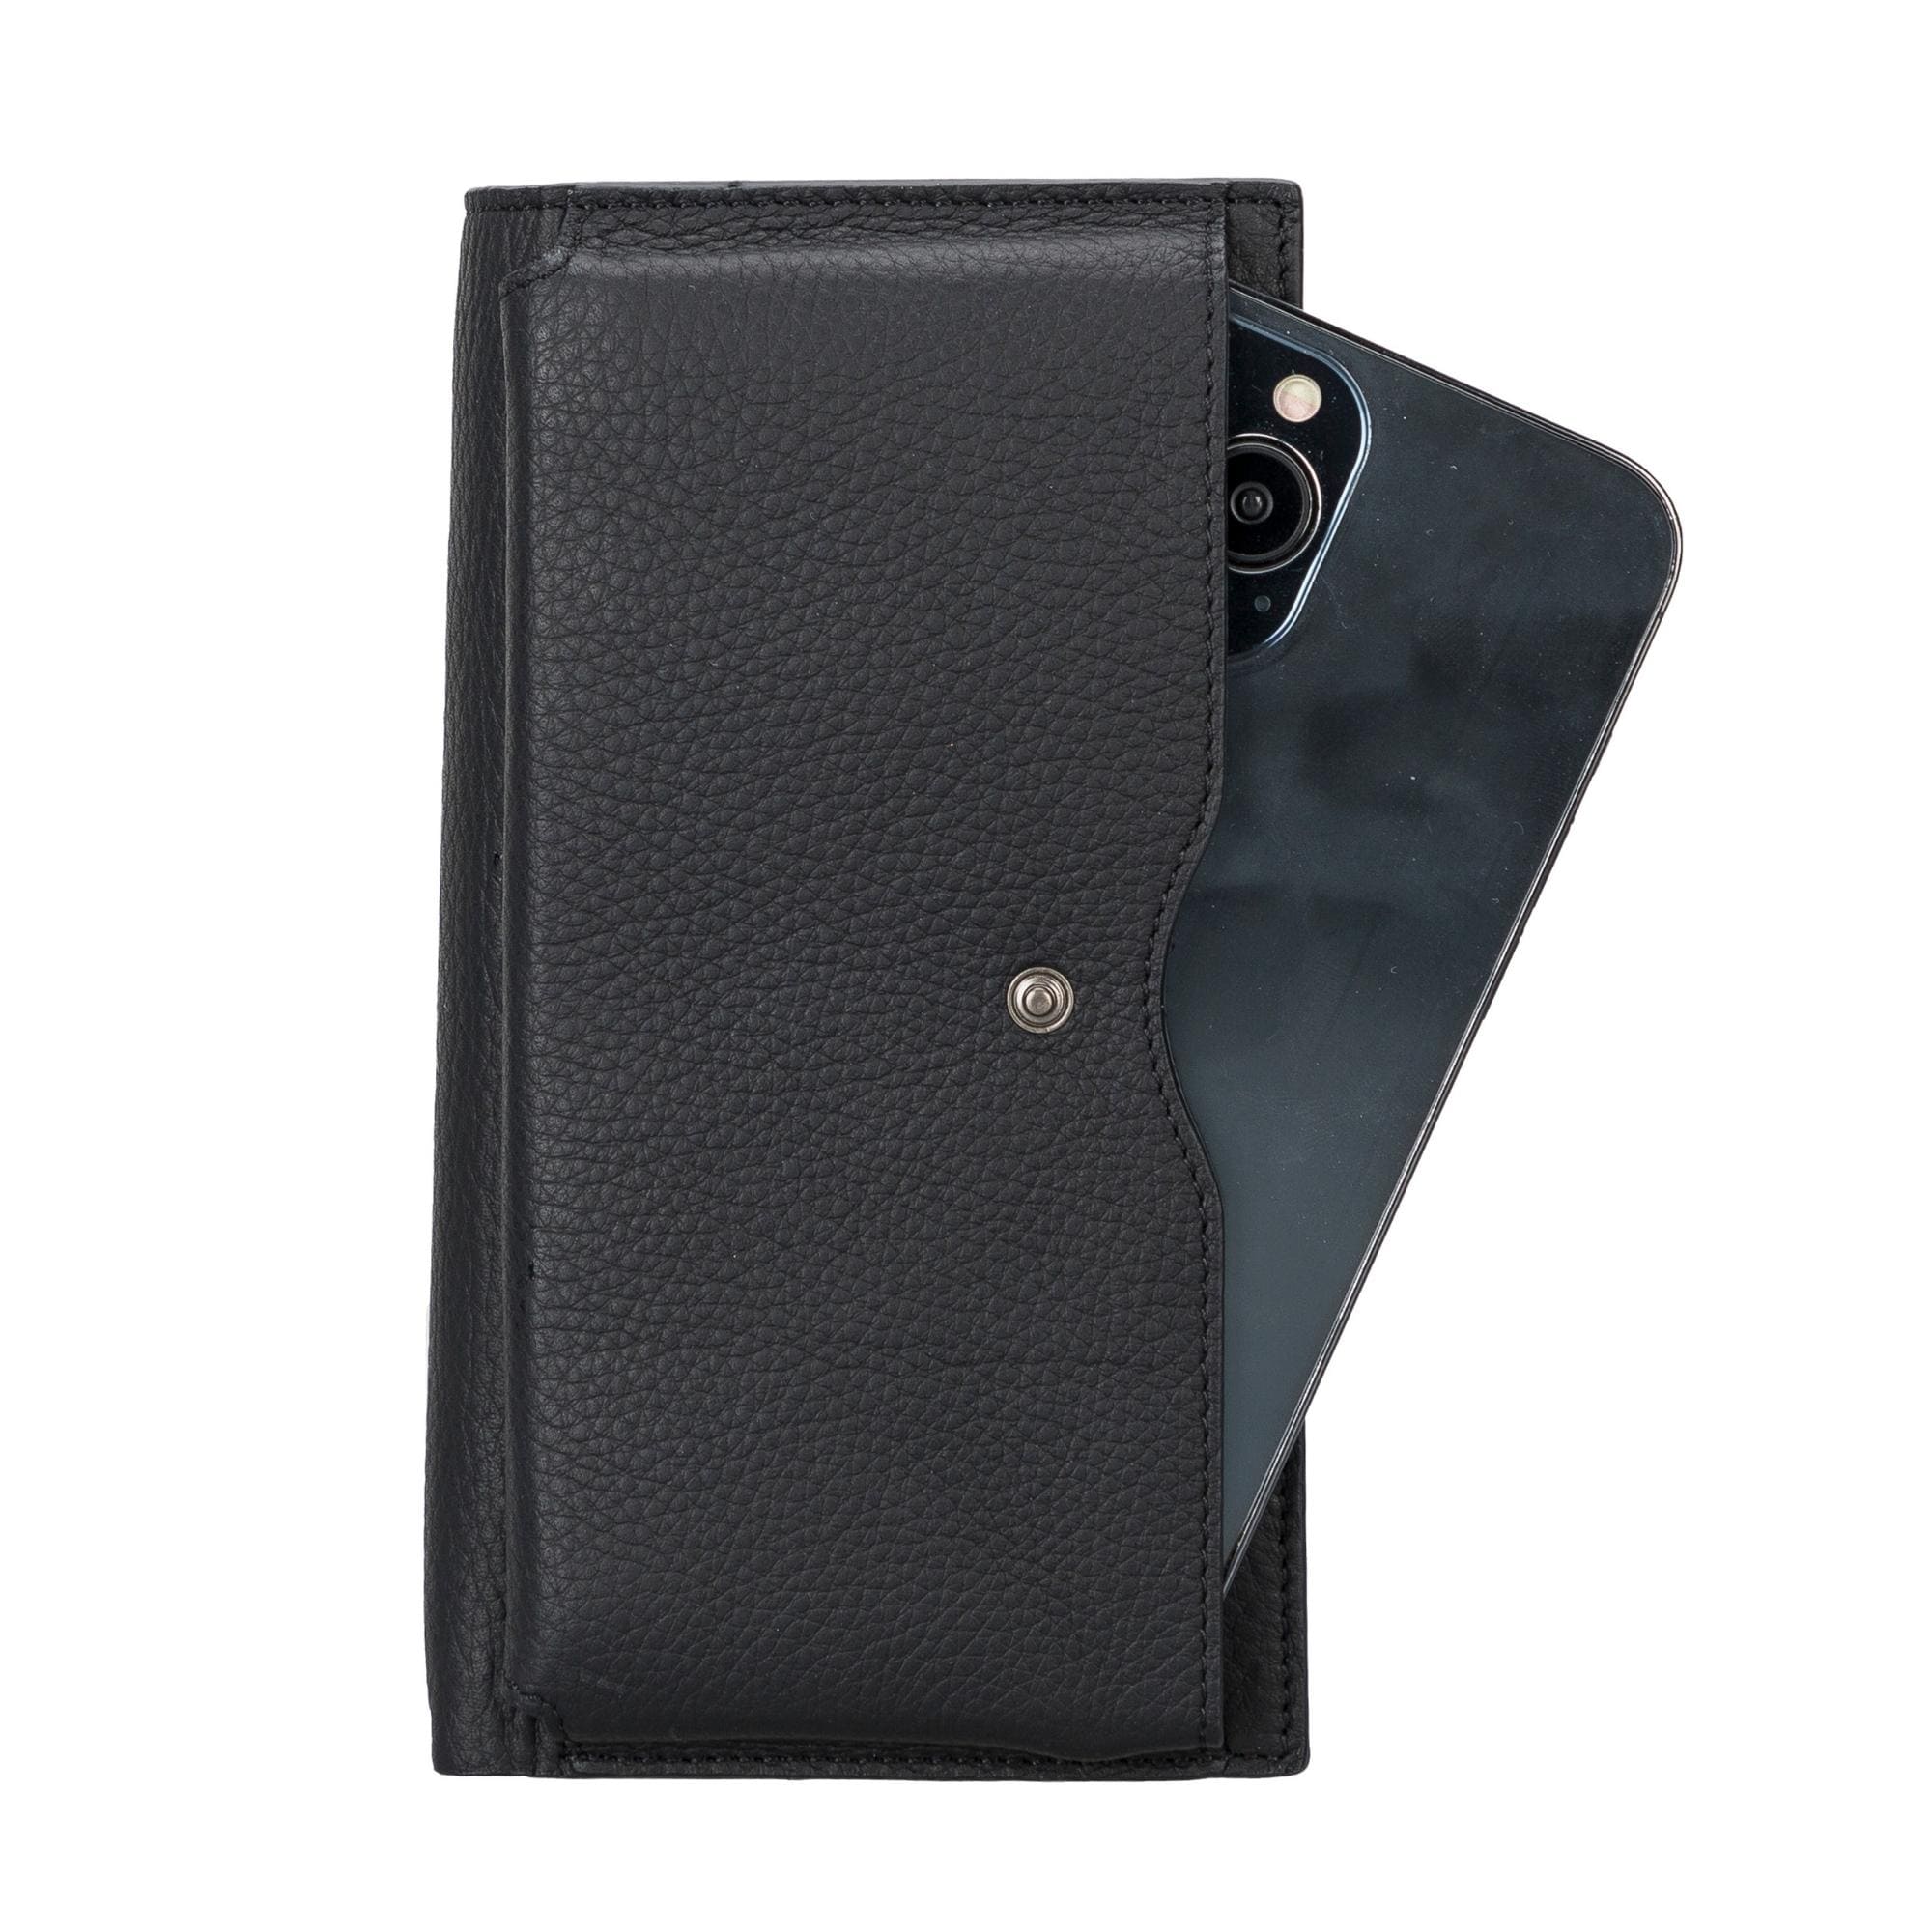 Riverton Leather Wallet for Women with Phone Section - Black - TORONATA